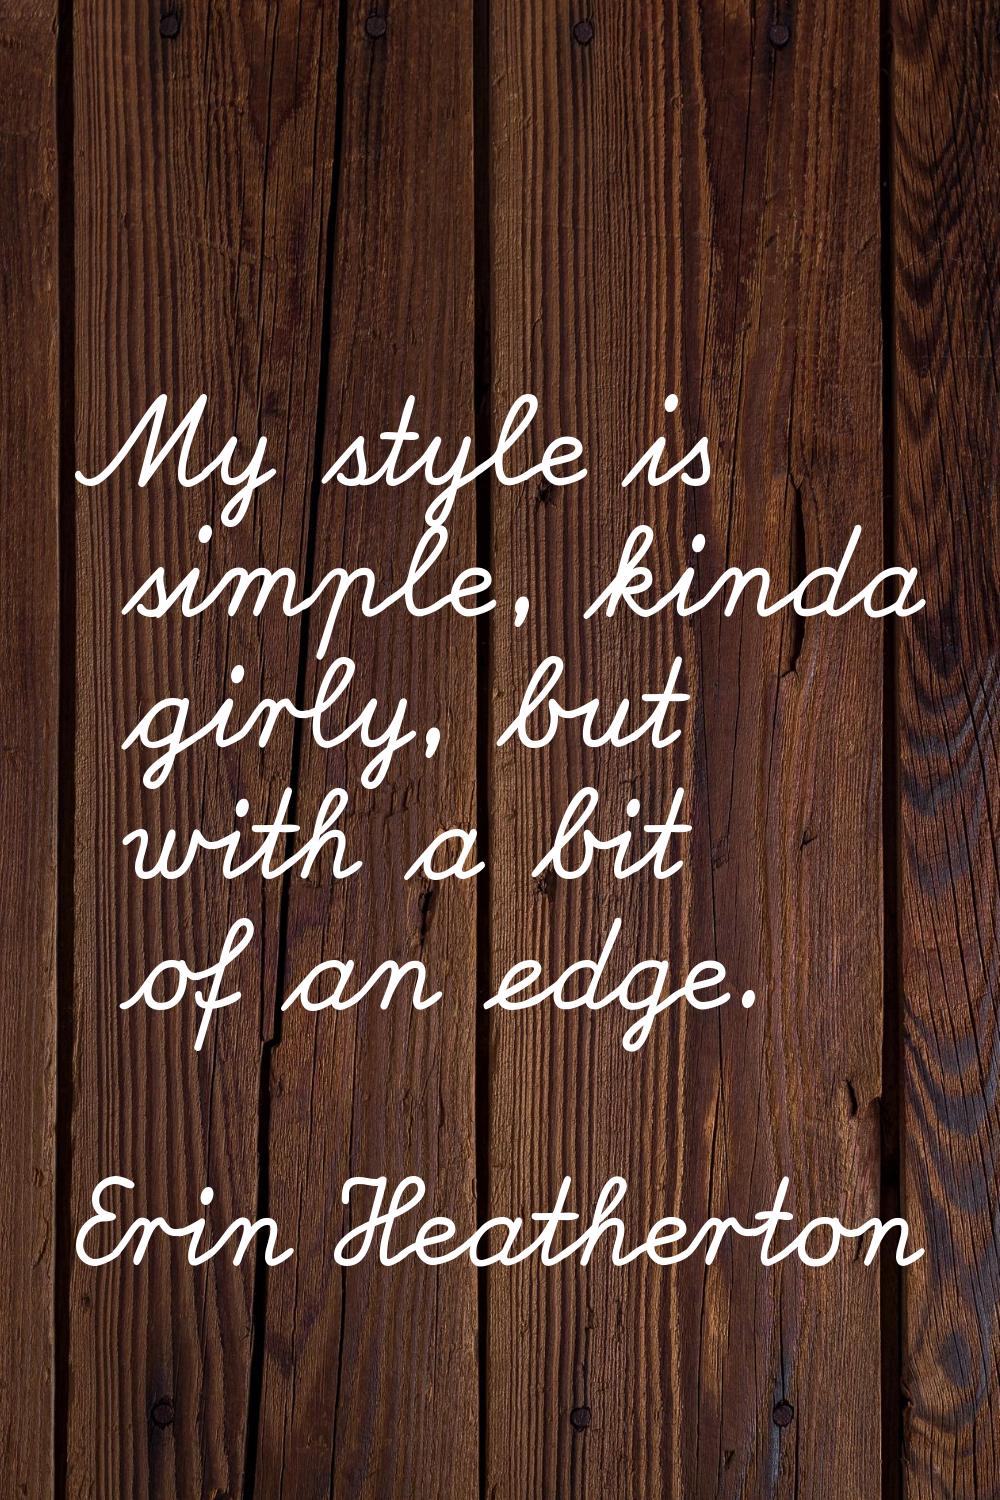 My style is simple, kinda girly, but with a bit of an edge.